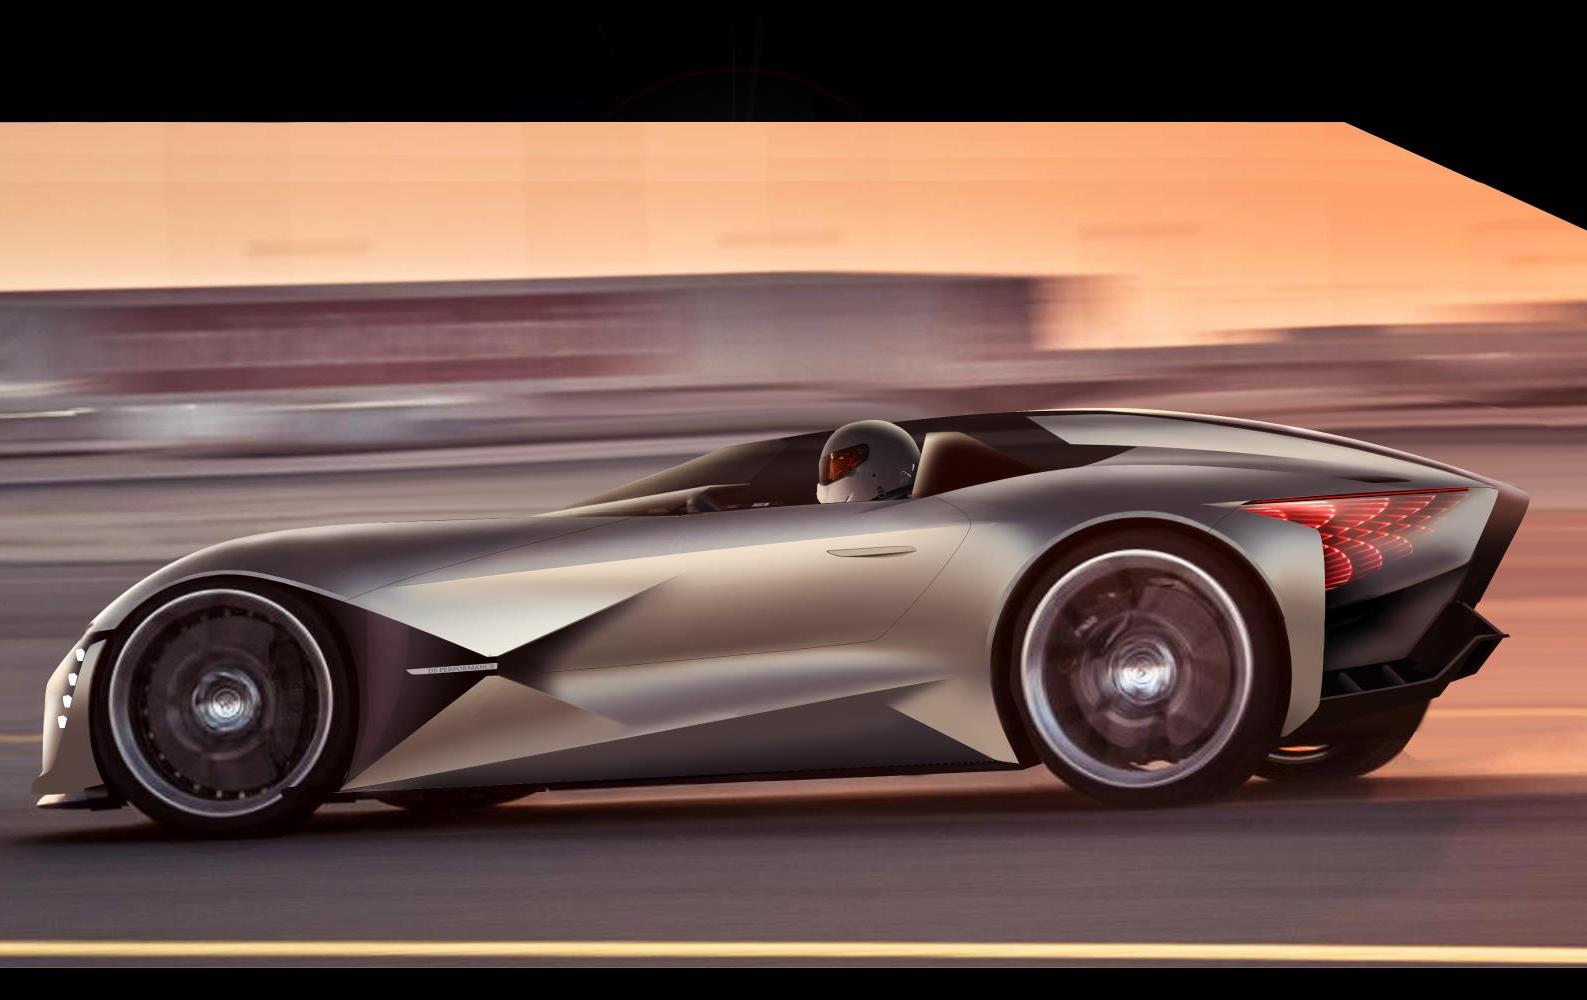 DS X E-Tense concept envisions dramatic supercar of 2035